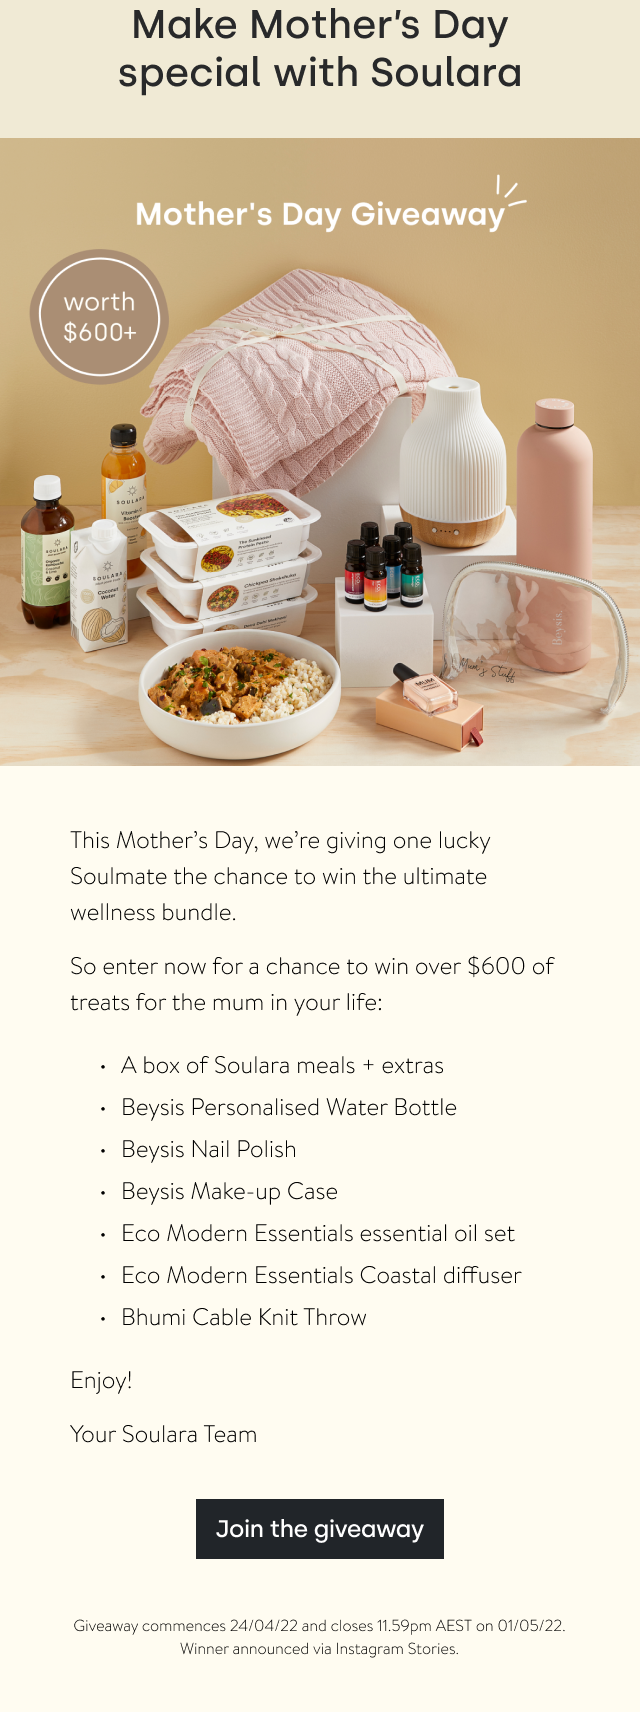 Join our Mother's Day Giveaway